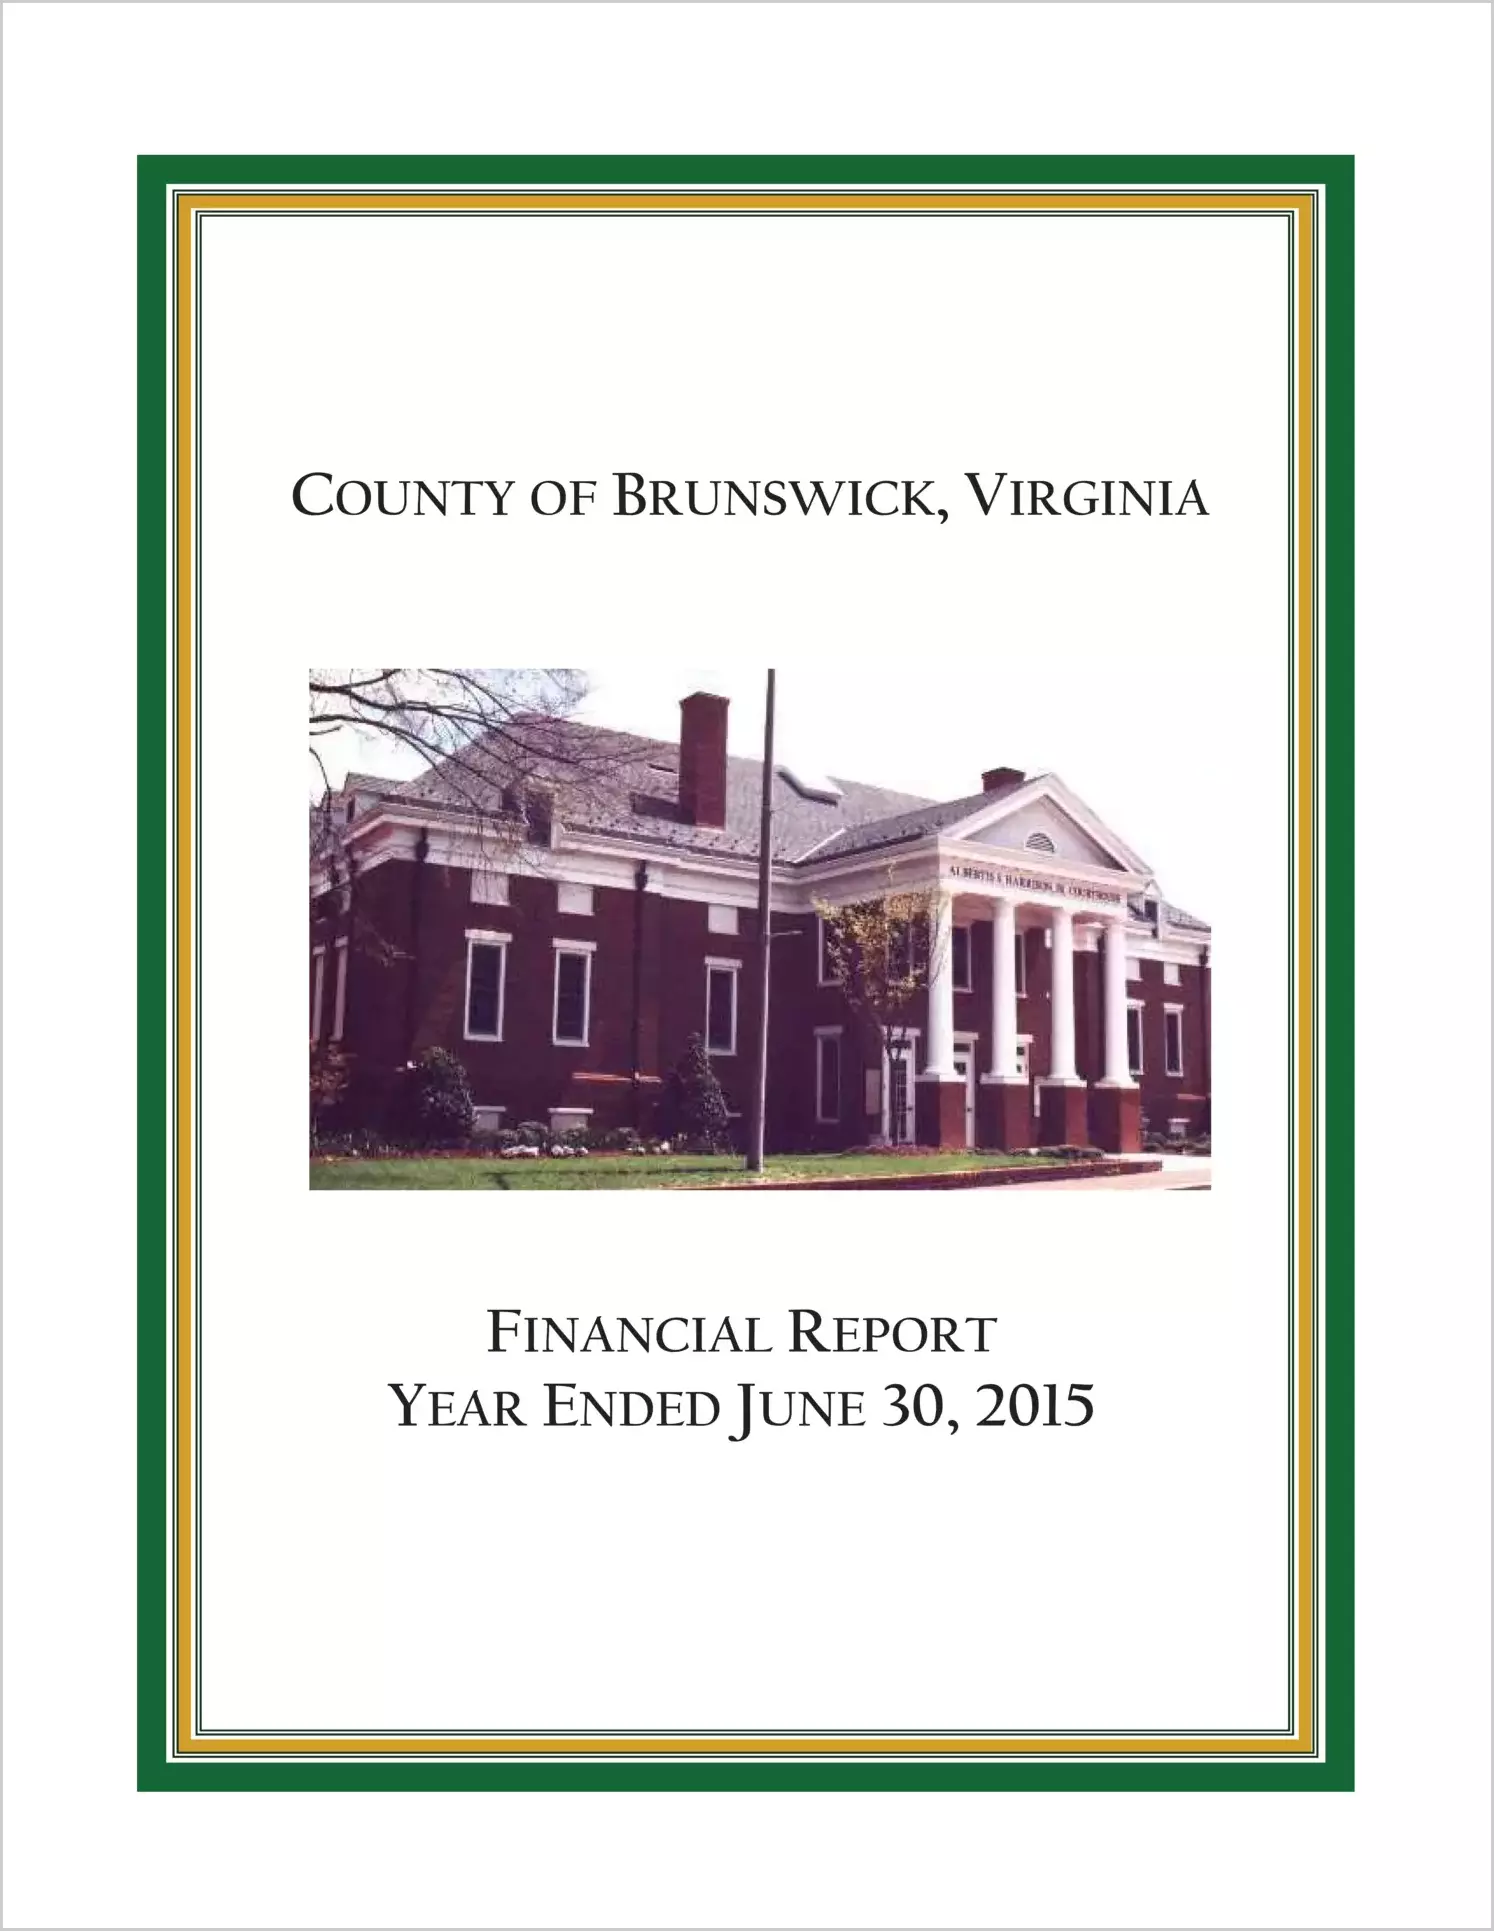 2015 Annual Financial Report for County of Brunswick